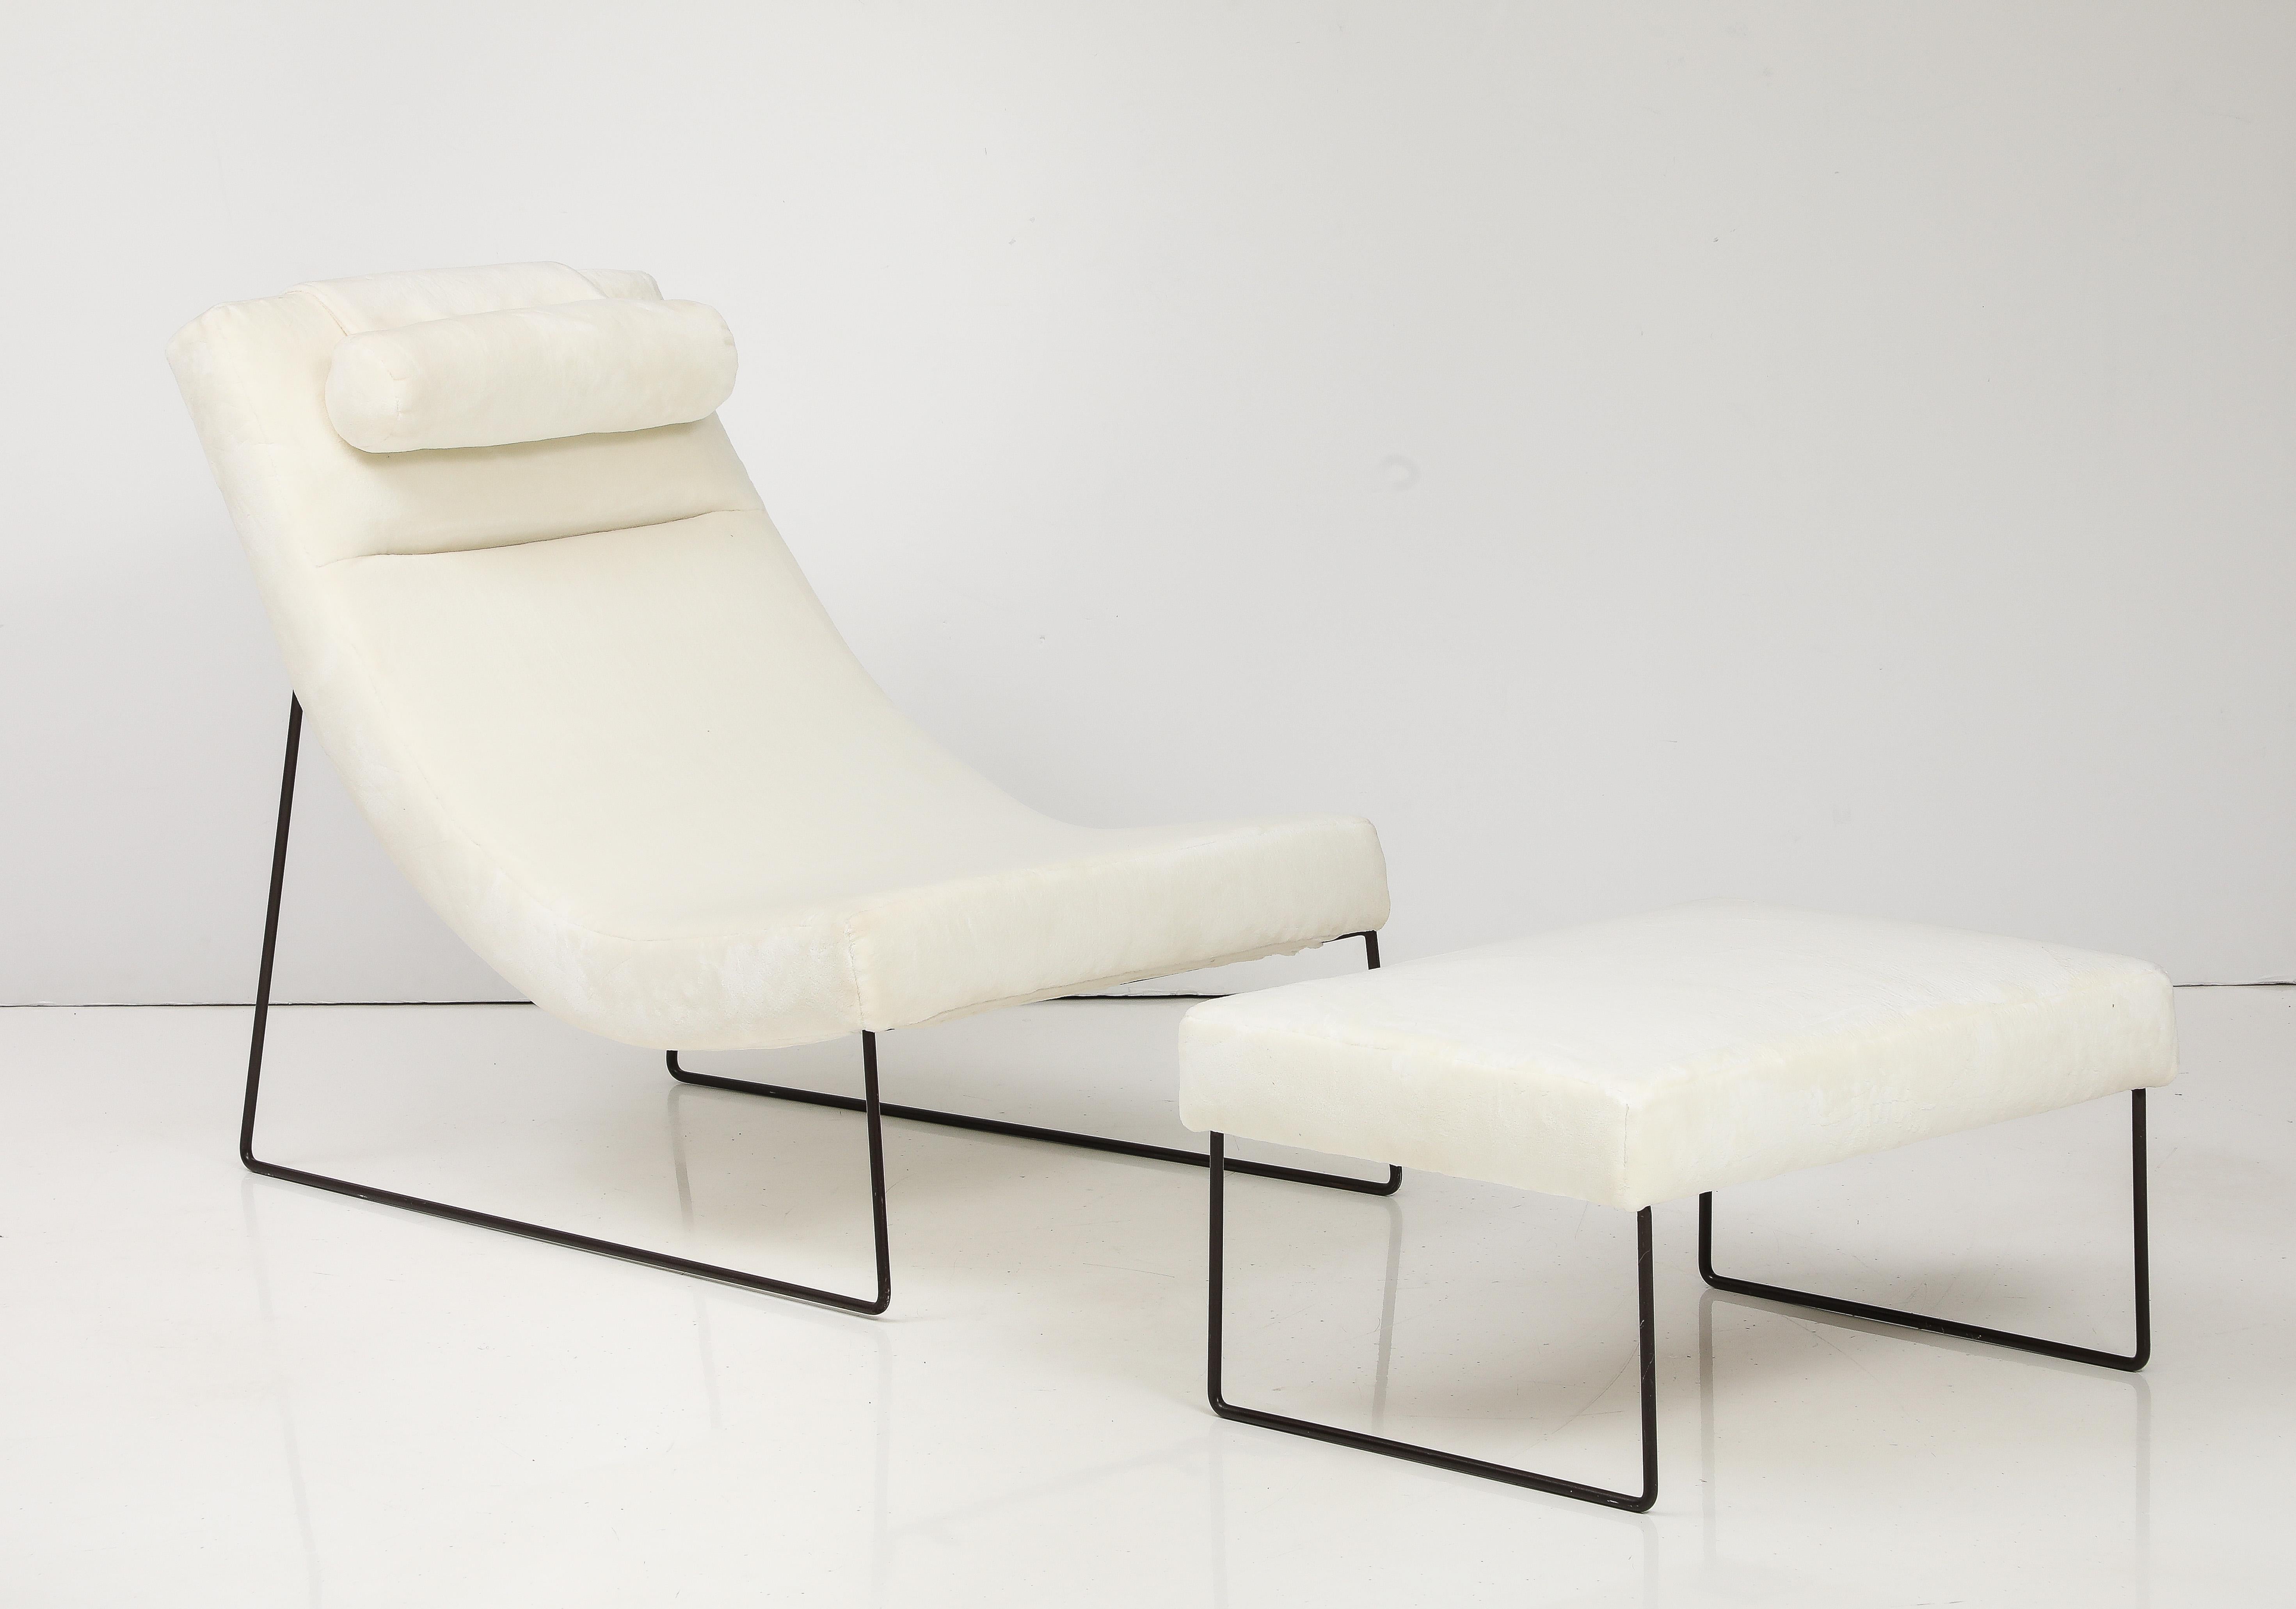 Italian modernist highly unique architectural wrought iron chaise longue with foot stool.  Newly upholstered in a creamy faux fur. 
Italy, circa 1960 
Size: 34